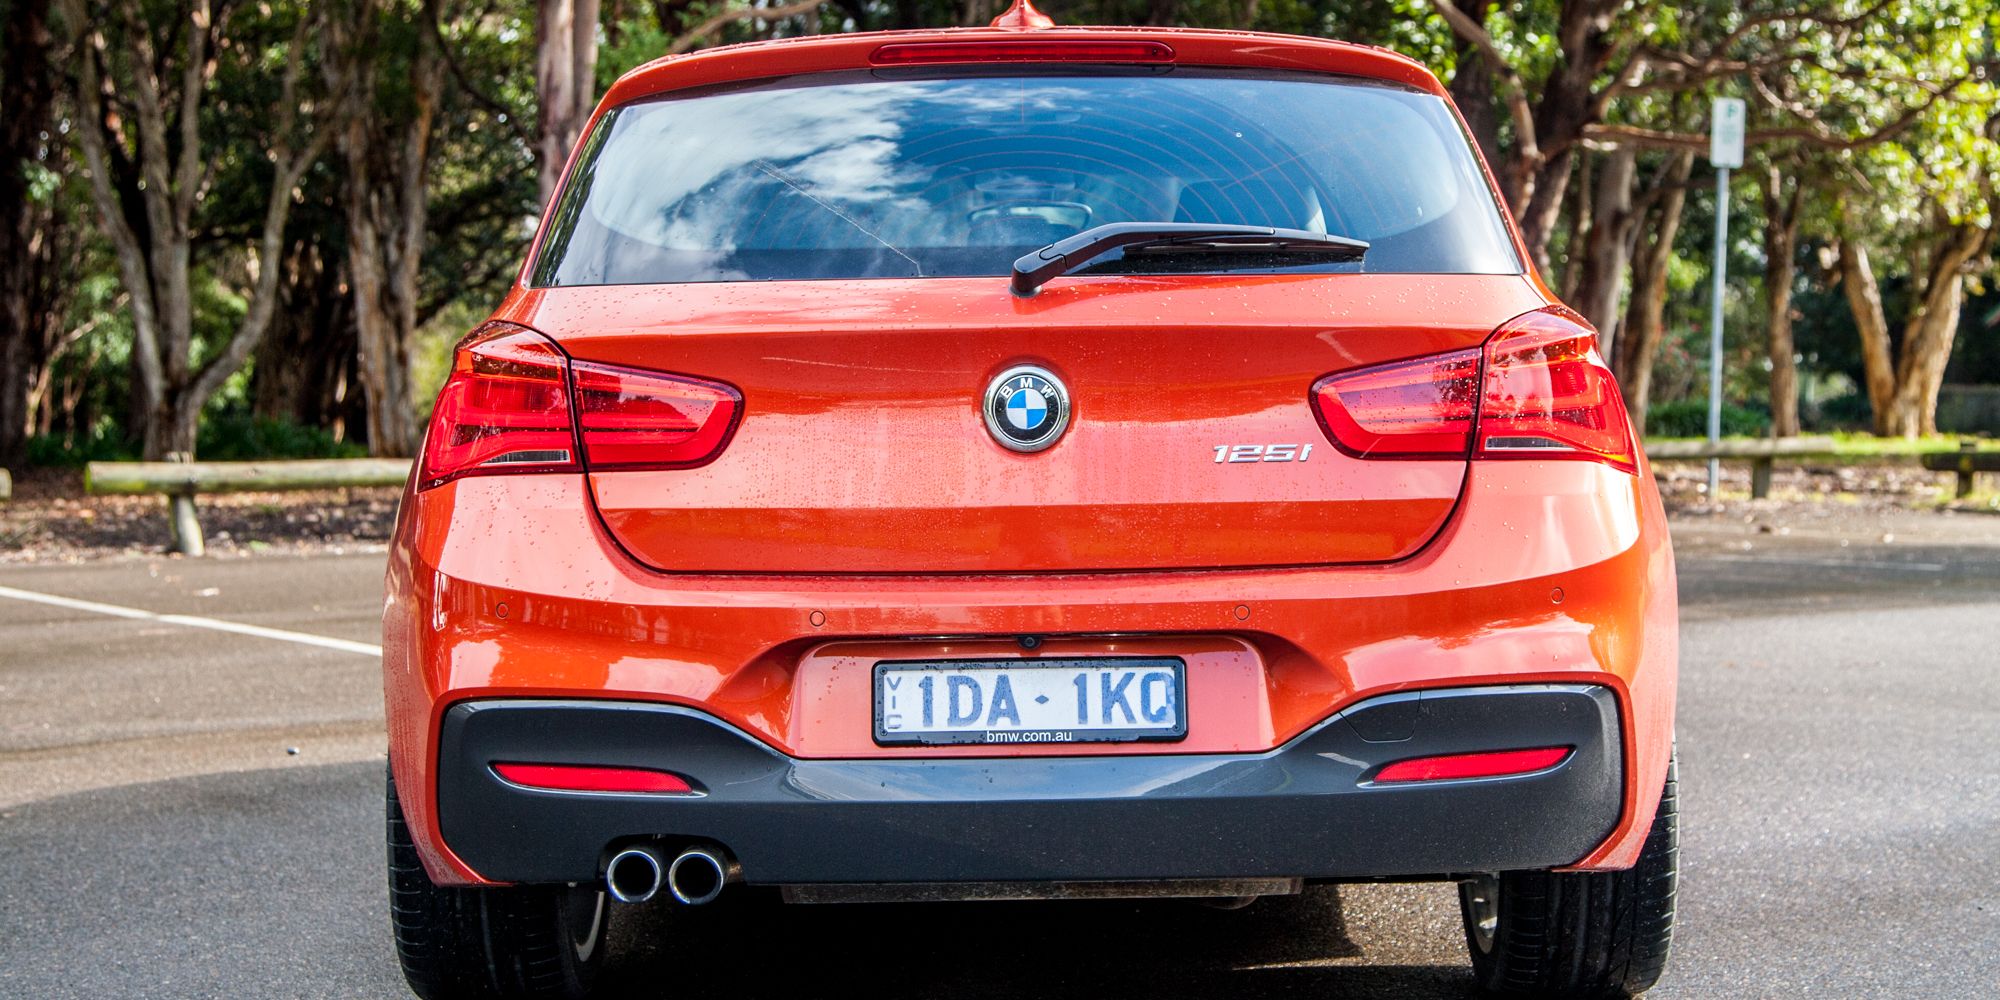 2015 Bmw 125i Rear End (View 2 of 15)